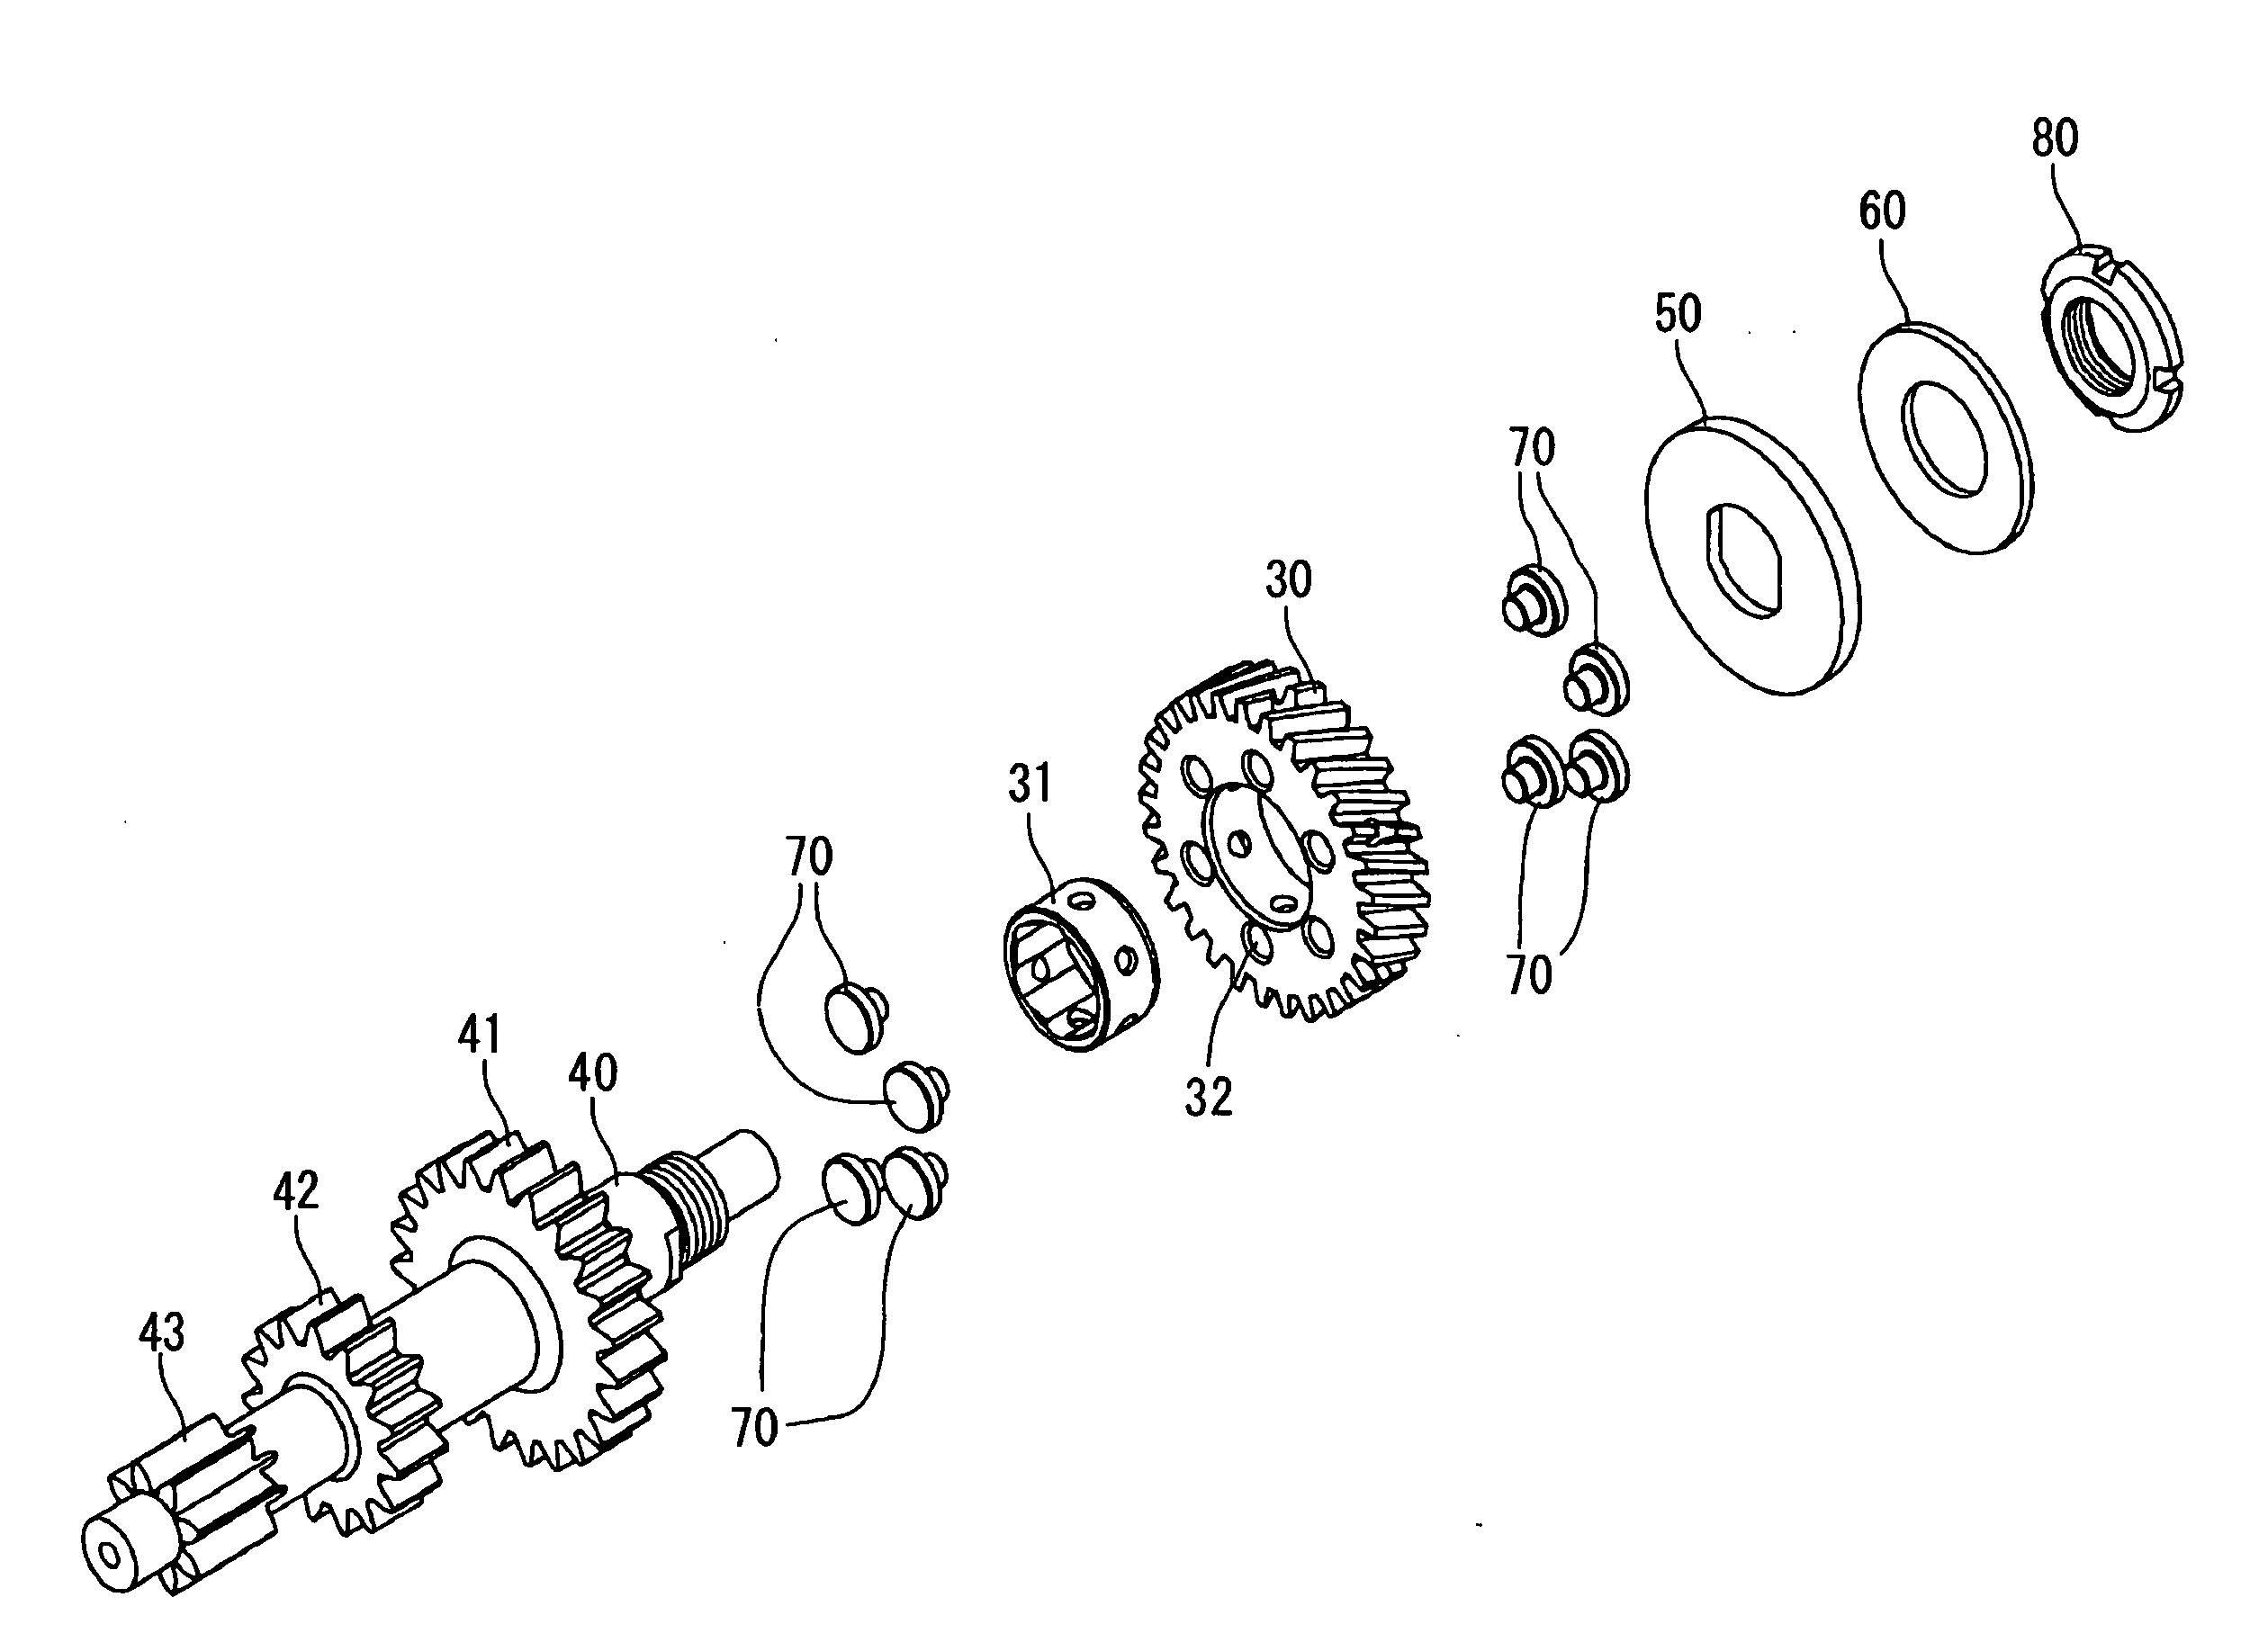 Power transmission device for power tool